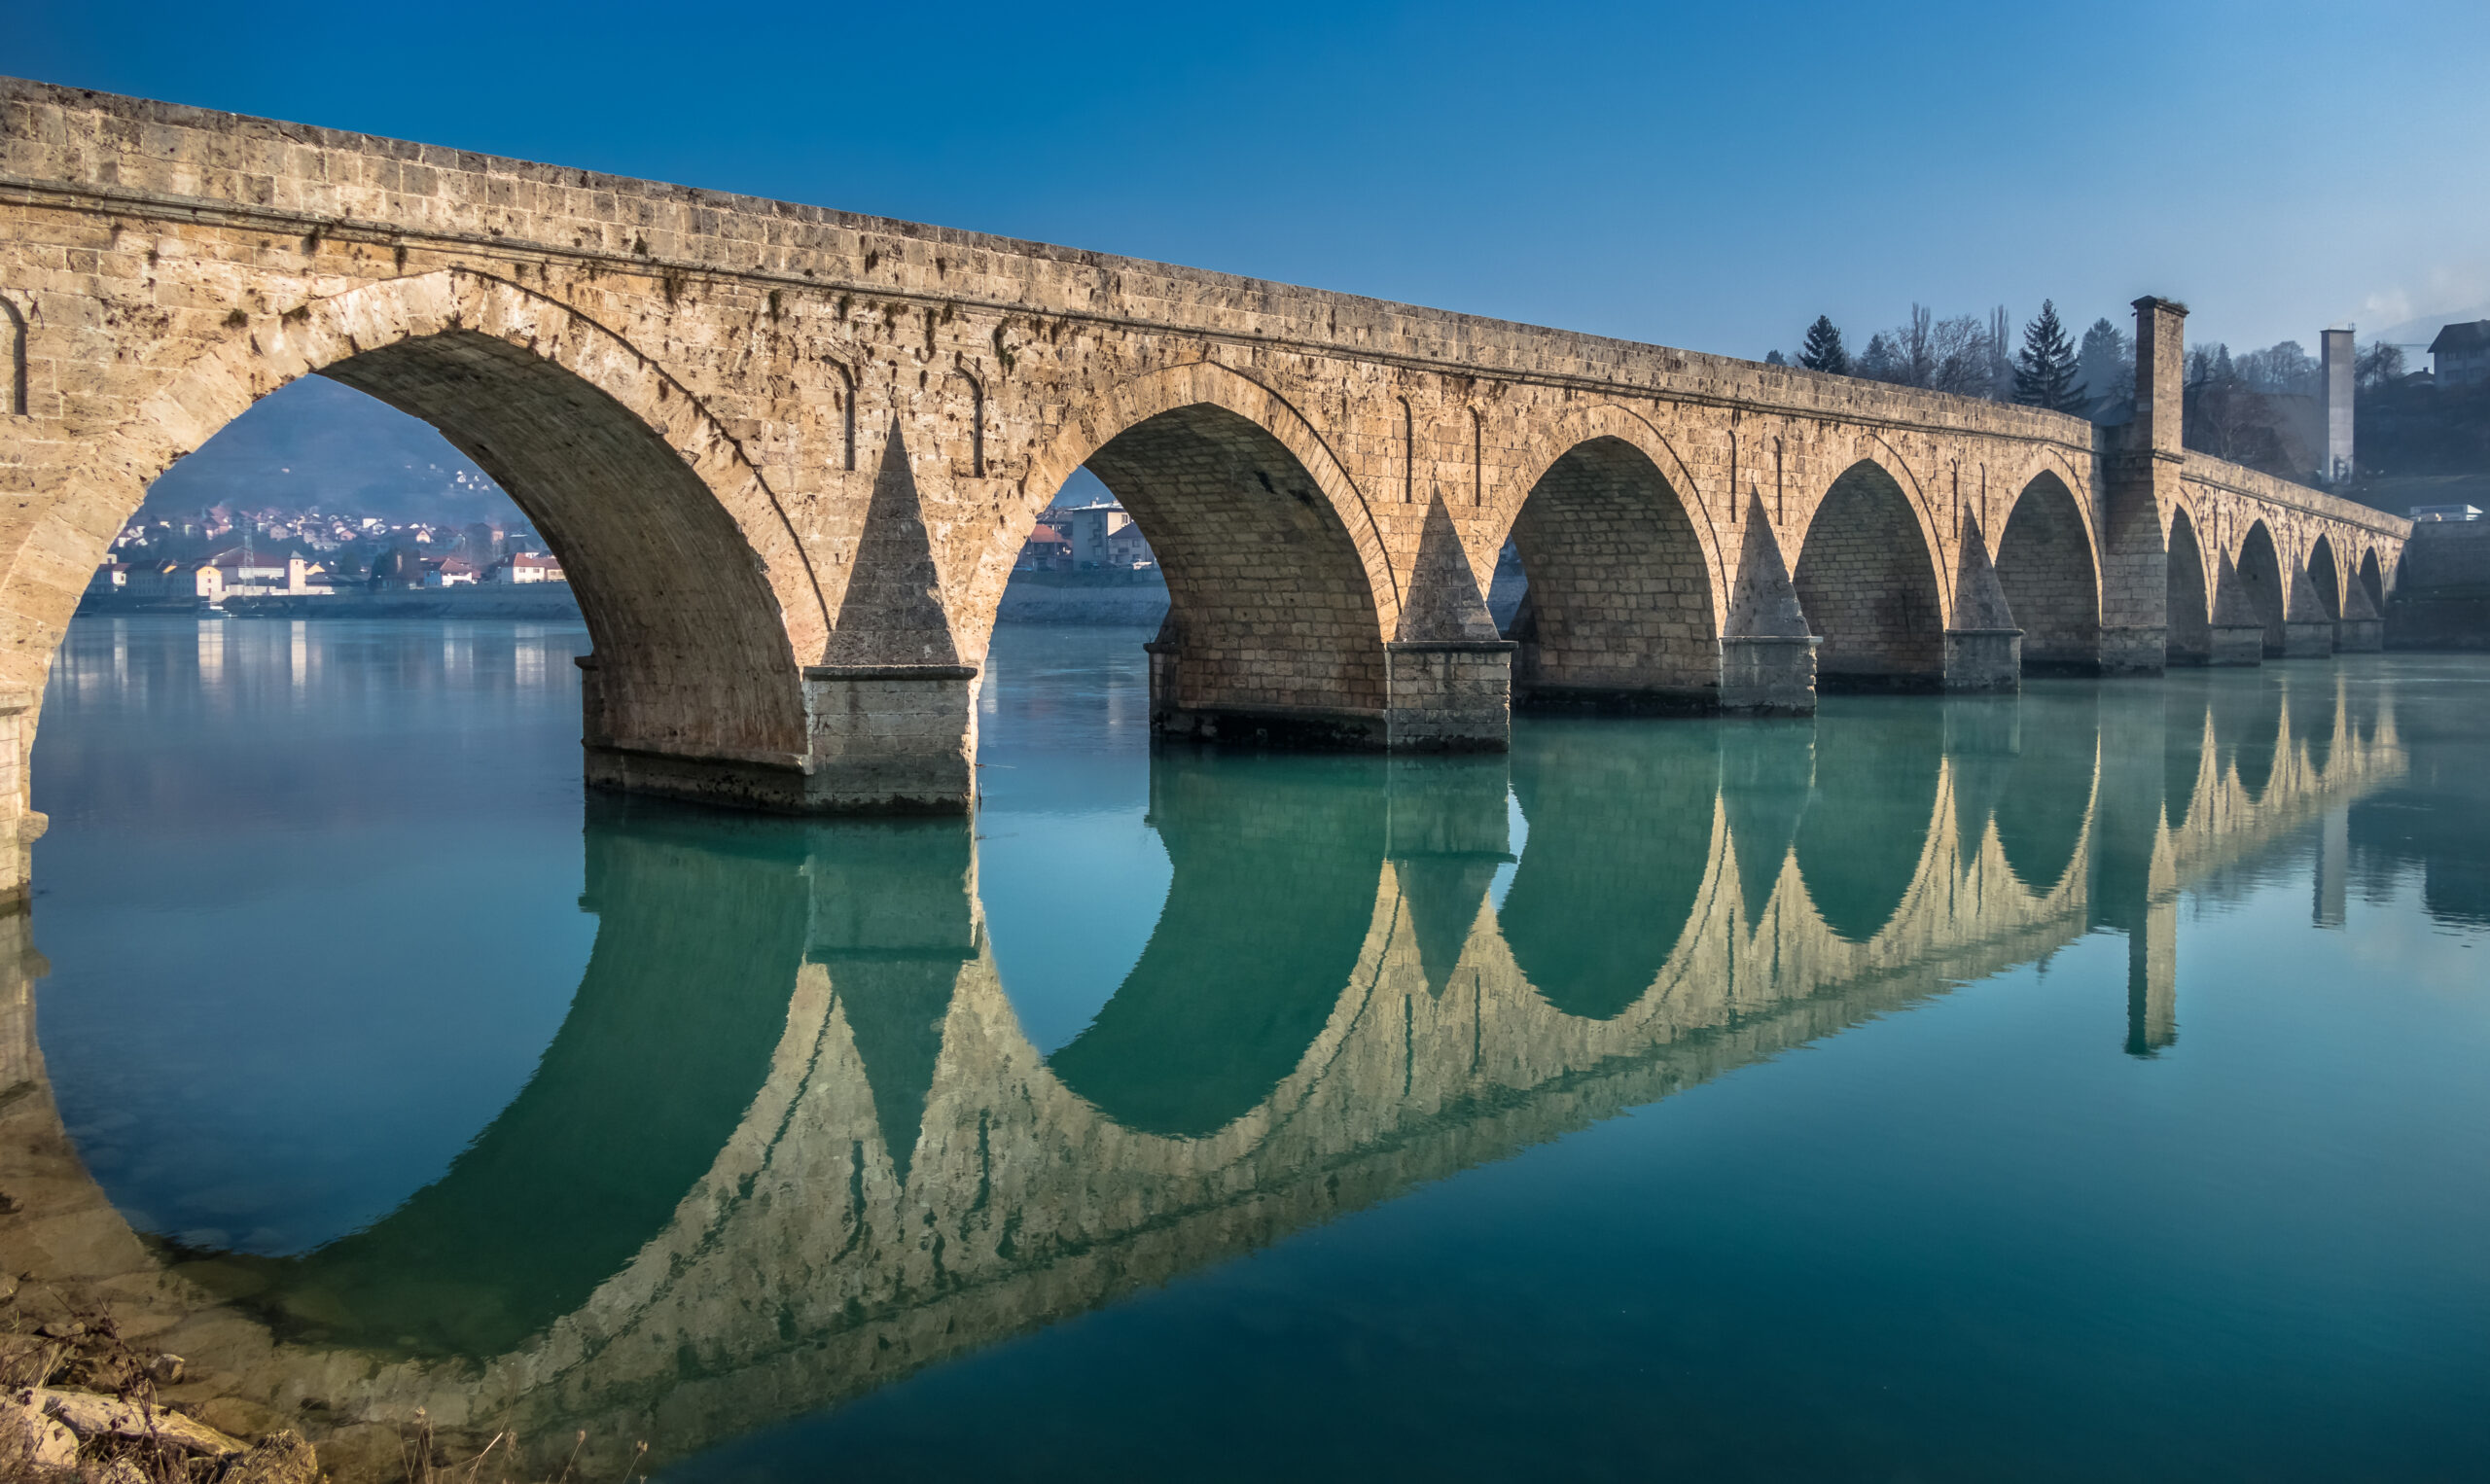 old-arched-bridge-over-water-way-with-a-perfect-calm-mirror-reflection